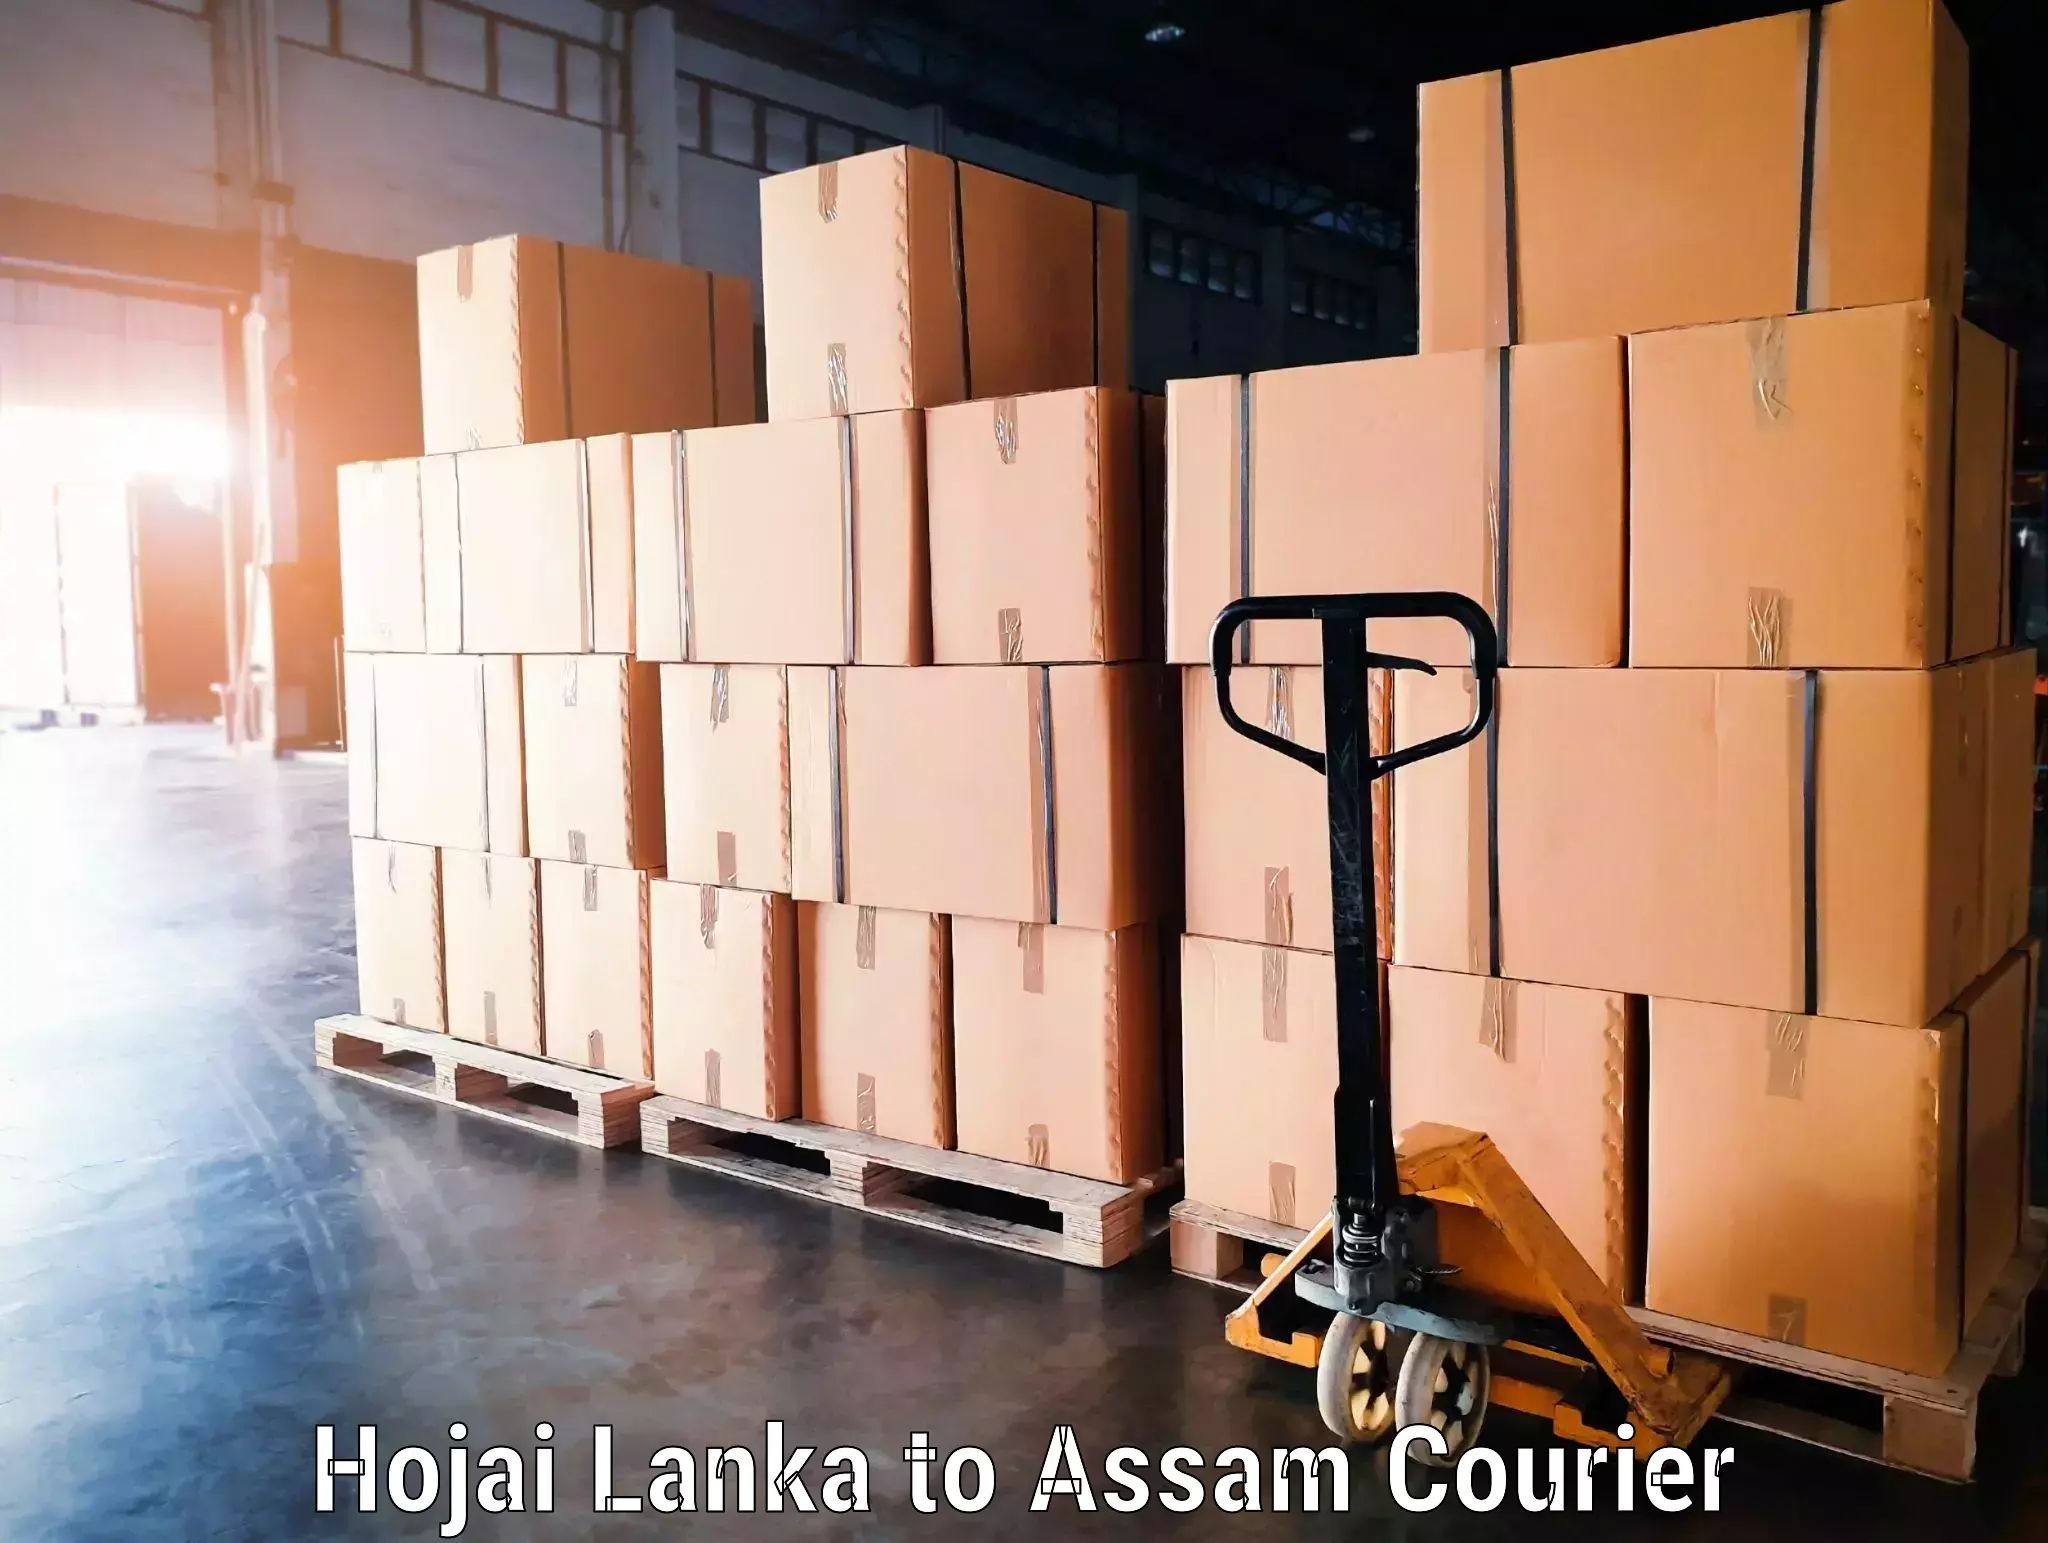 Luggage dispatch service in Hojai Lanka to Assam